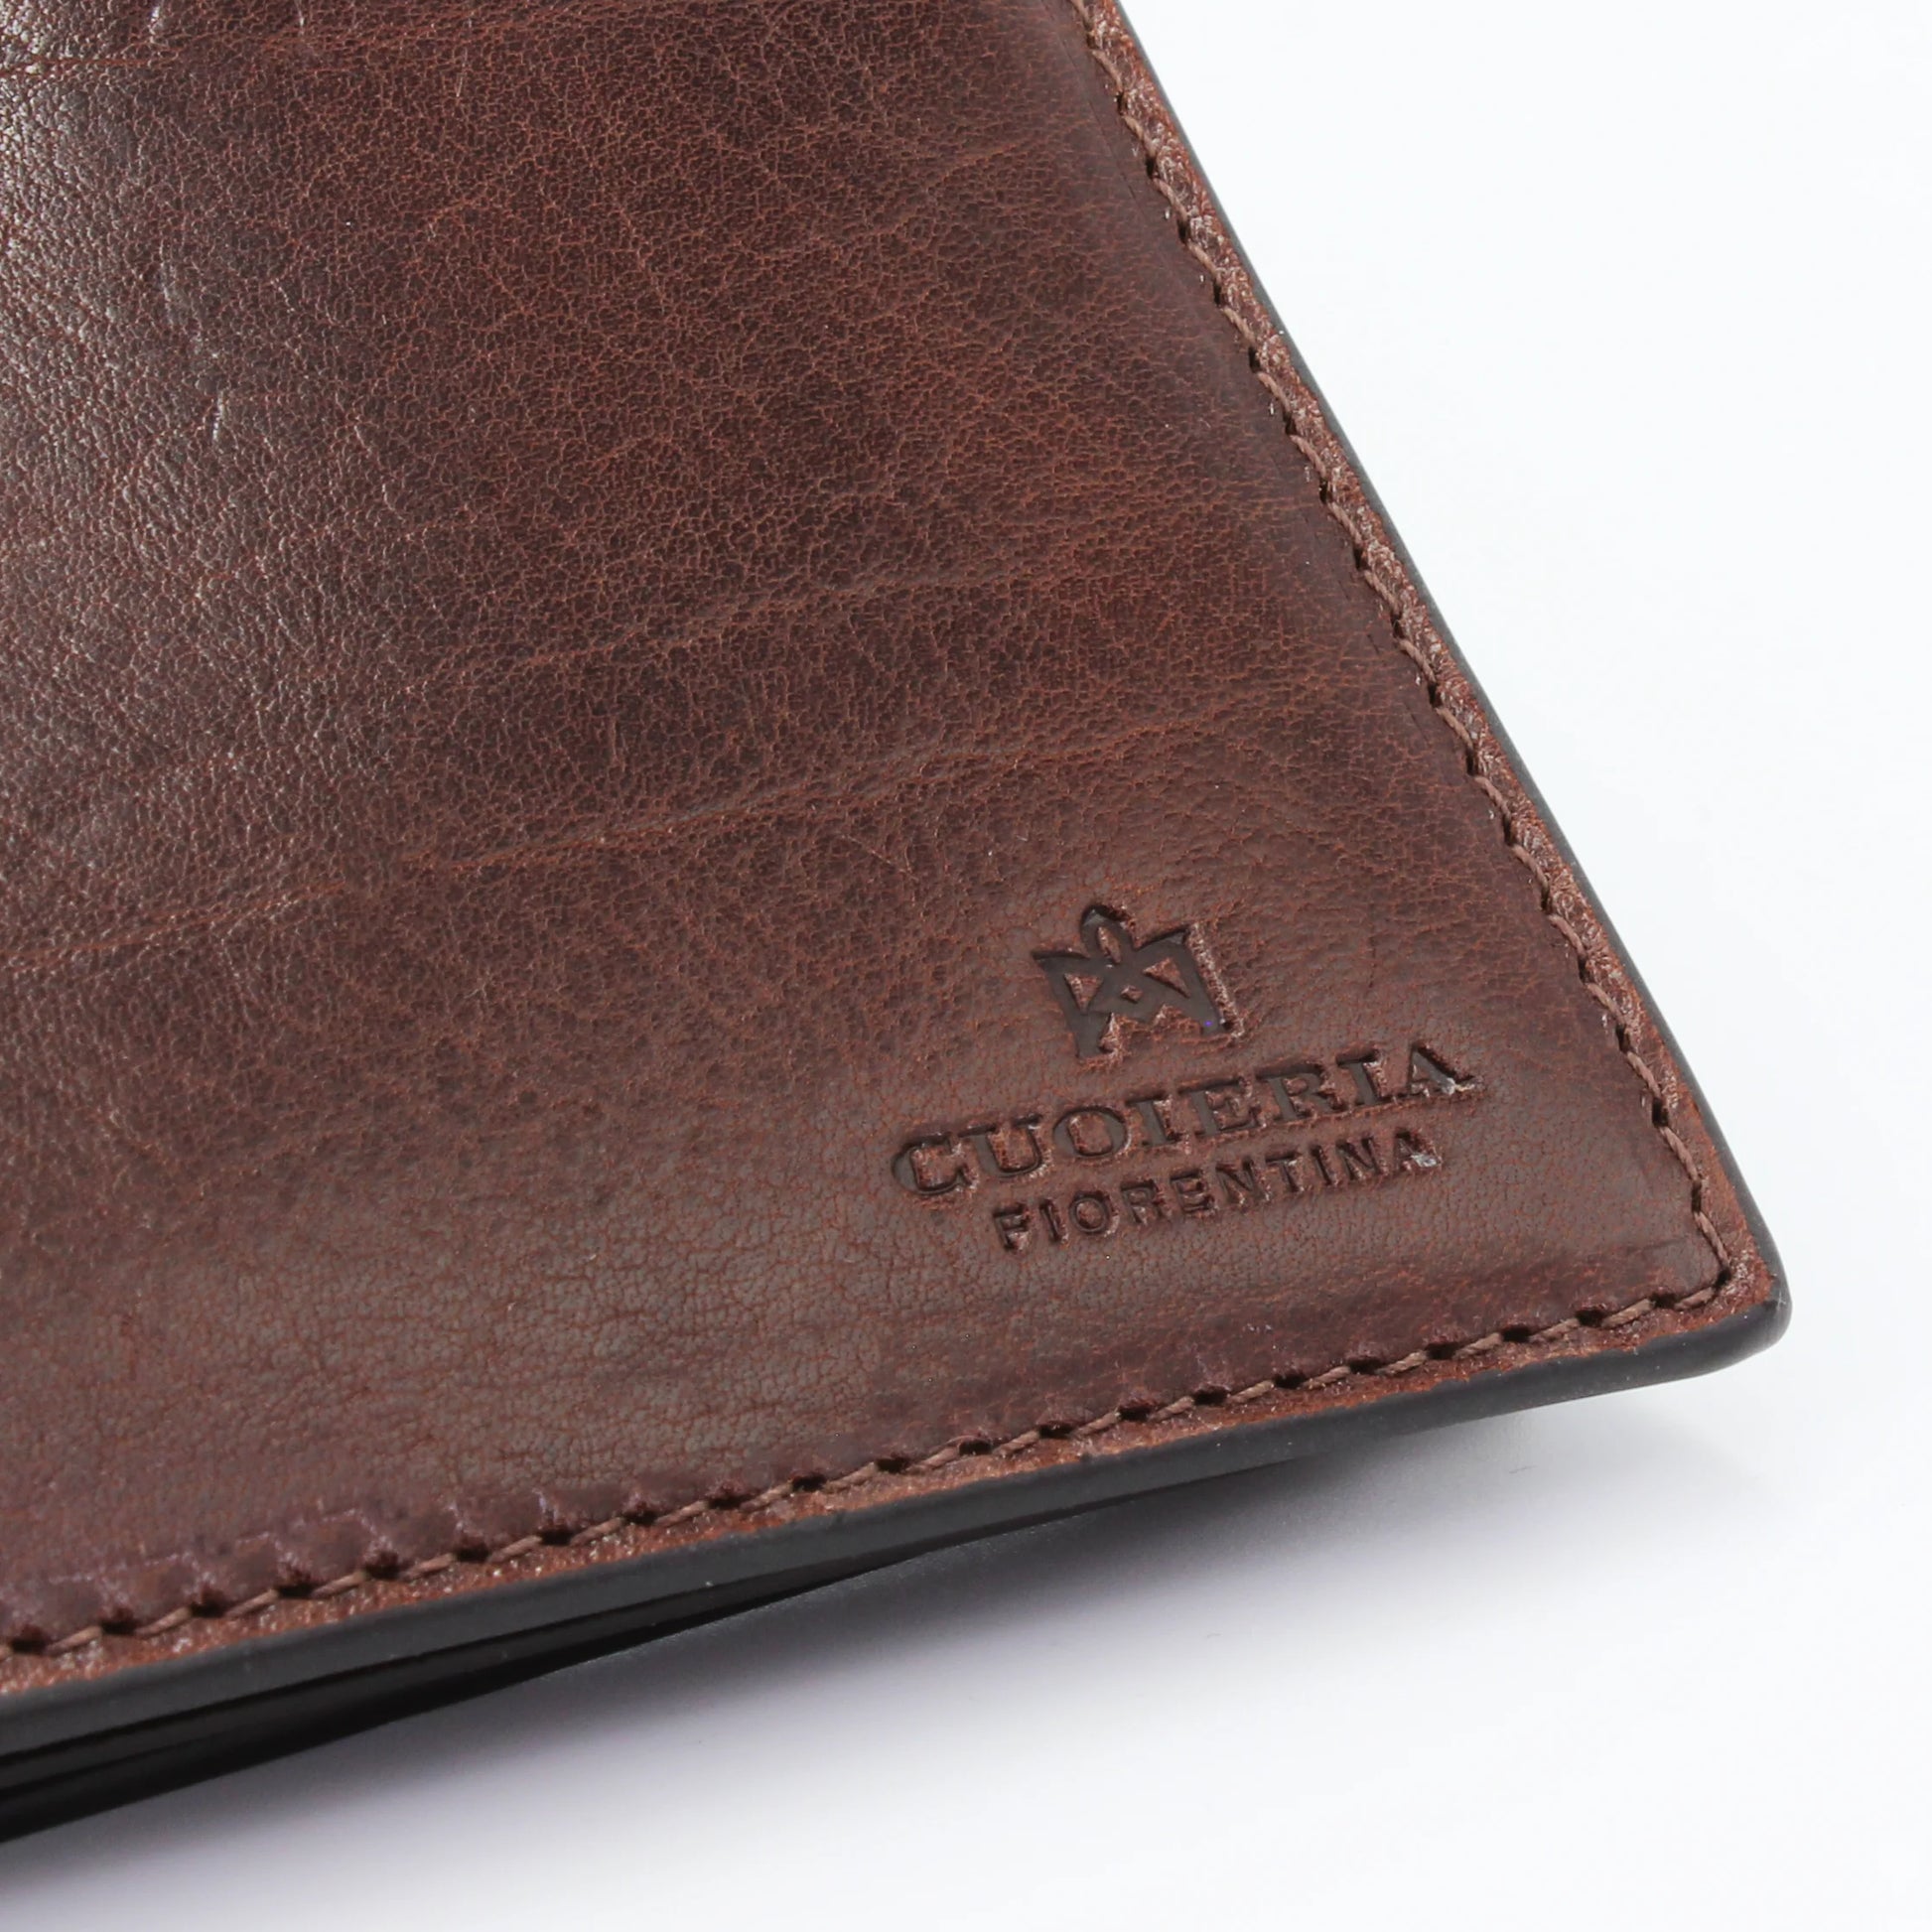 Shop our Italian-made Cuoieria Fiorentina Italian leather wallet in testa di moro (PU00000906735) or browse our range of Italian wallets and purses for men & women in-store at Aliverti Cape Town, or shop online.   We deliver in South Africa & offer multiple payment plans as well as accept multiple safe & secure payment methods.